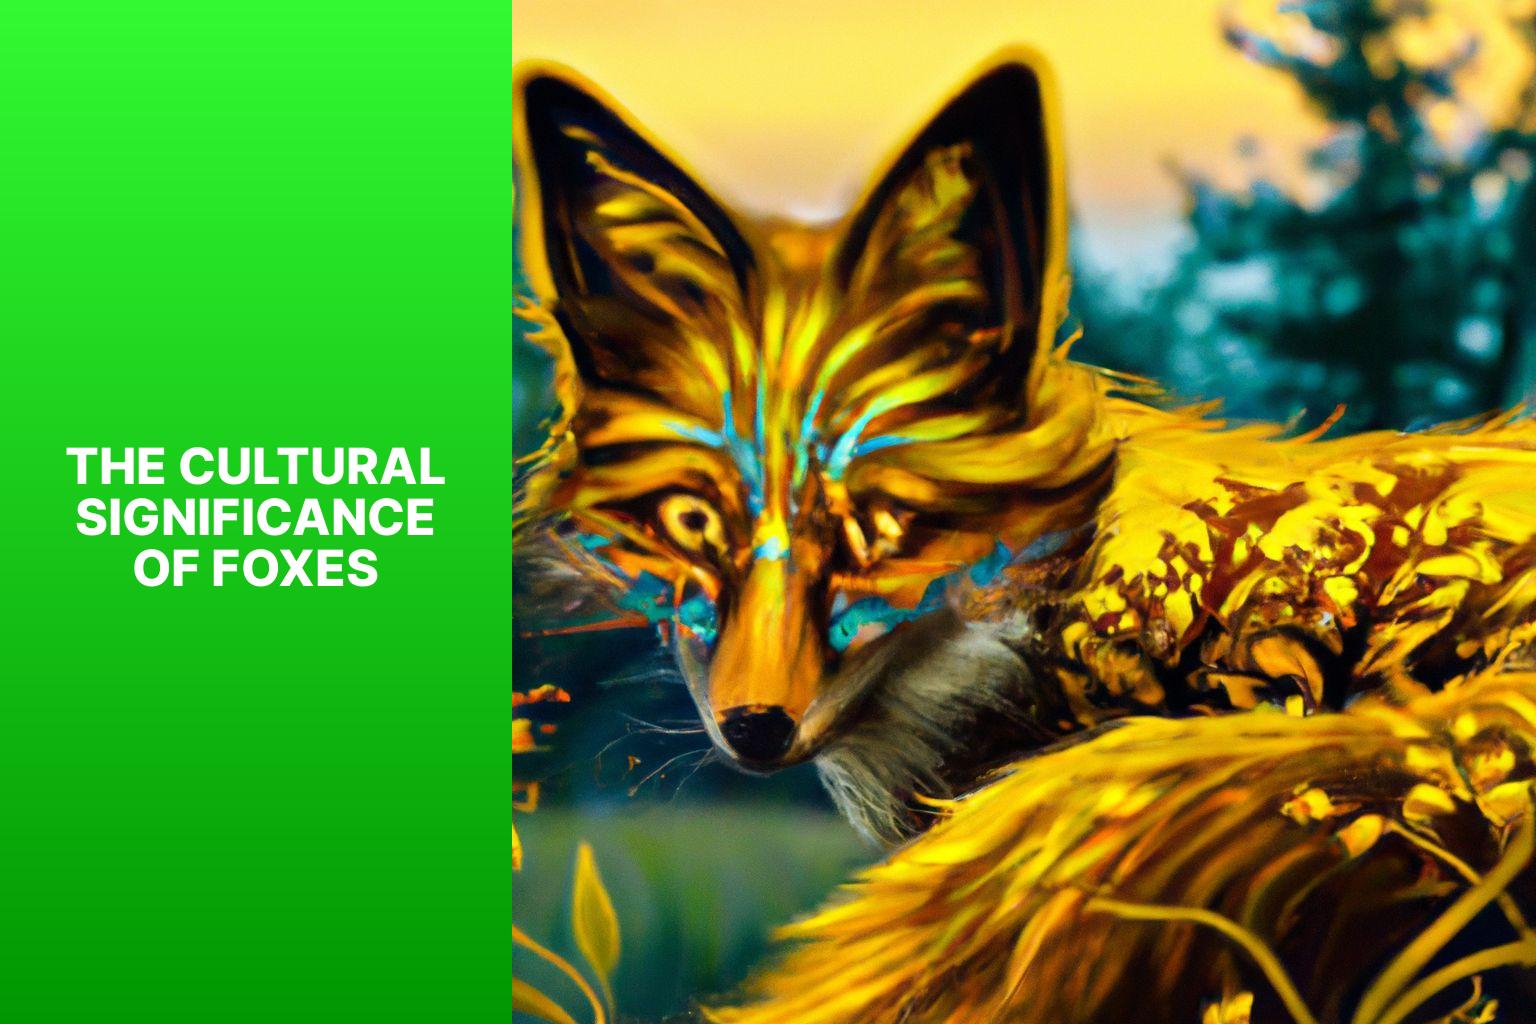 The Cultural Significance of Foxes - Fox Myths in Popular Culture 